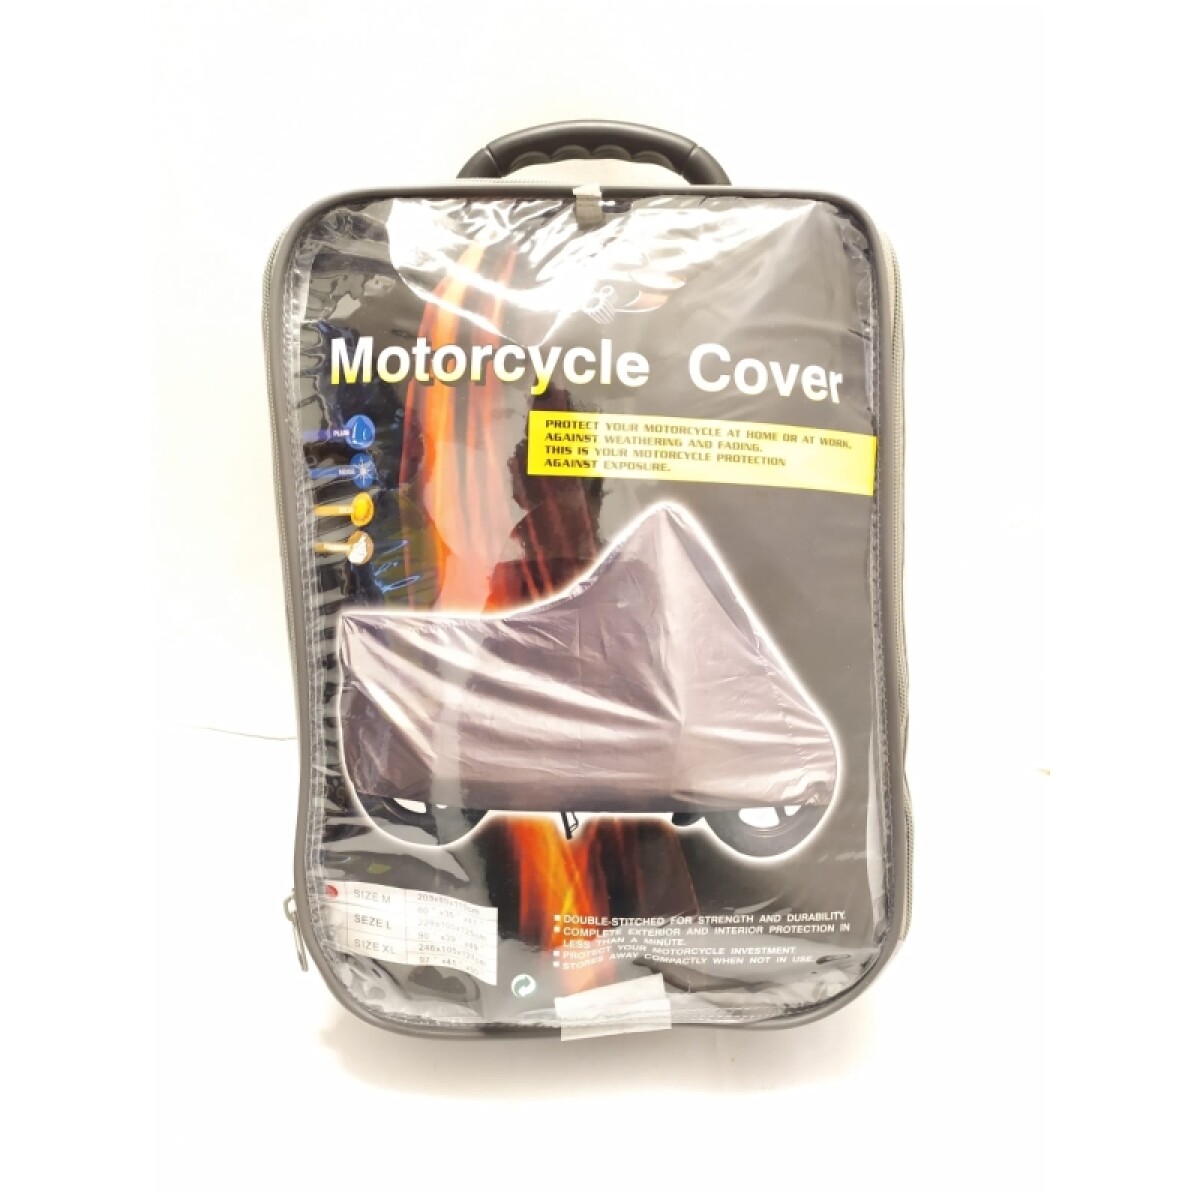 Cubre Moto Lona Impermeable Talle M 